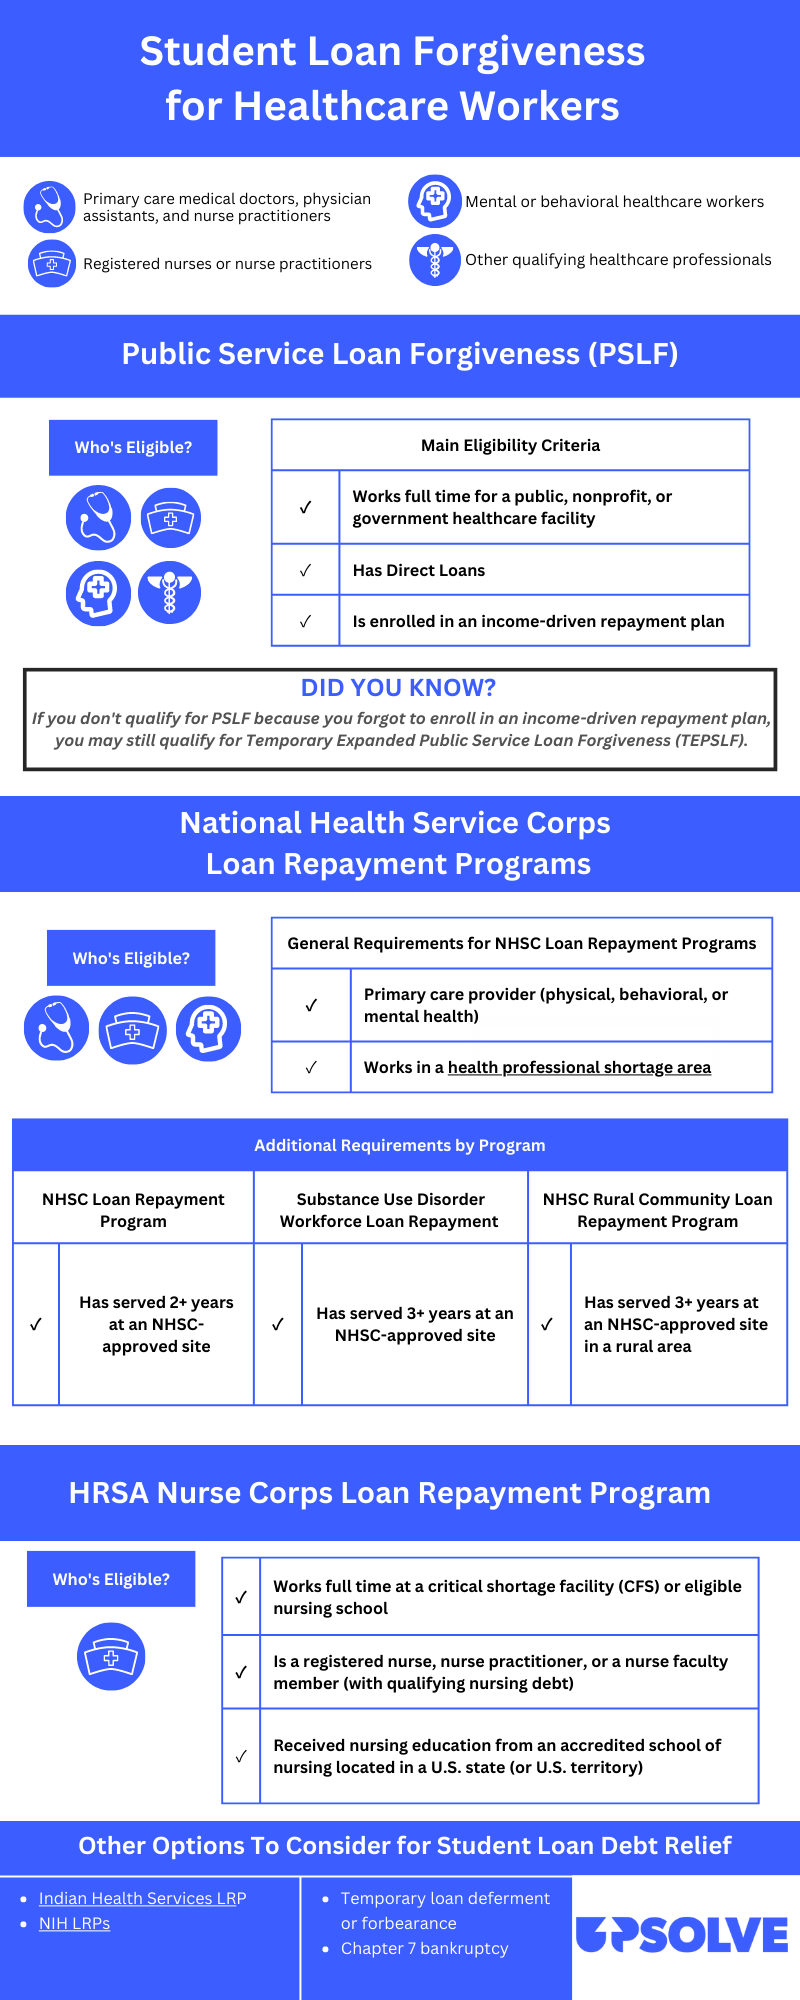 Blue and white infographic showing the top options for student loan forgiveness for healthcare workers and what the eligibility requirements are.